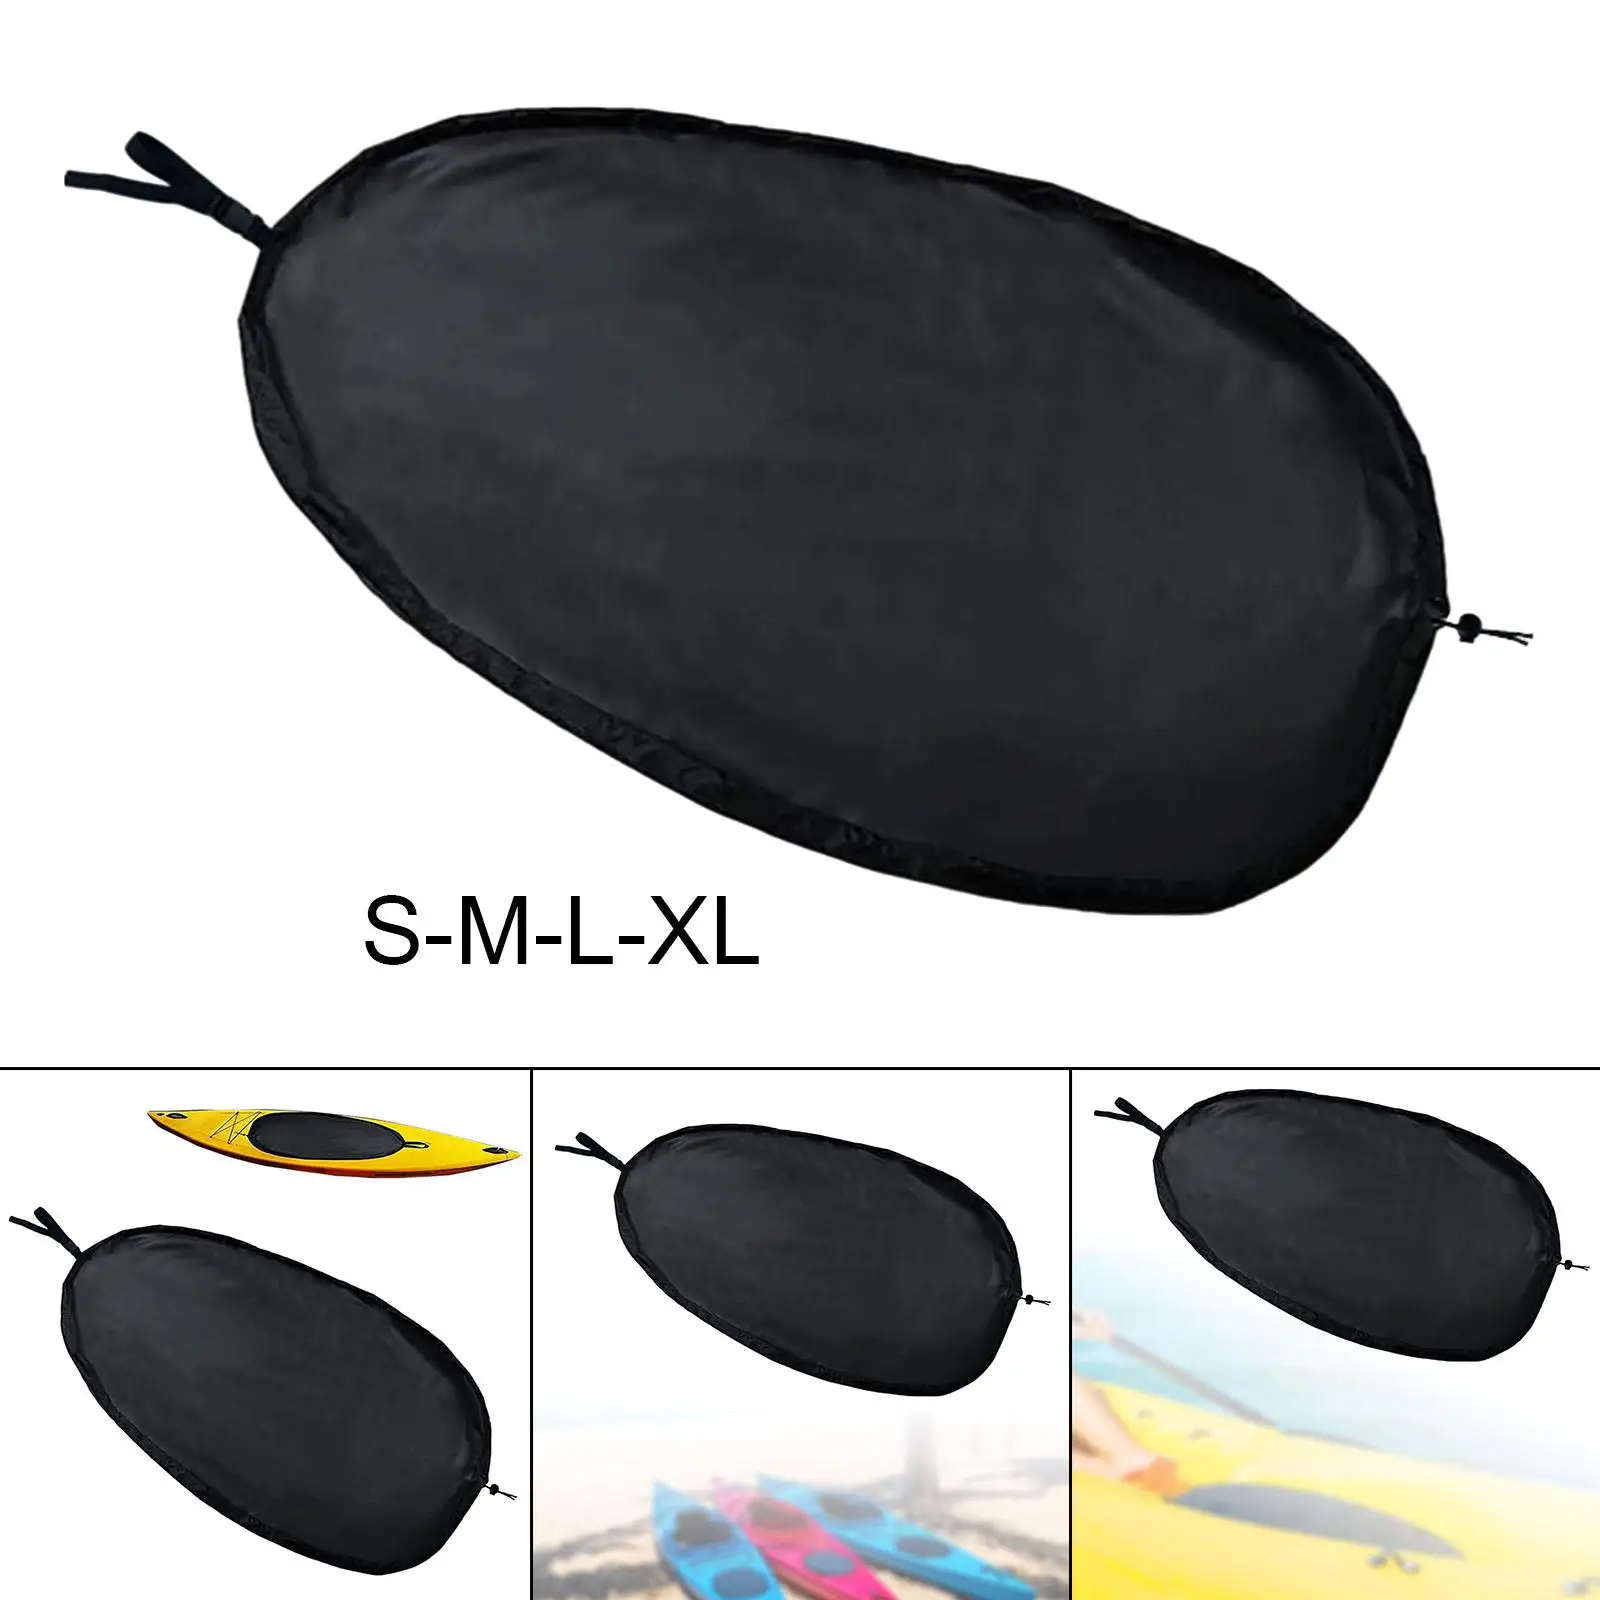 Cockpit cover for professional kayak Adjustable sun protection Water resistance